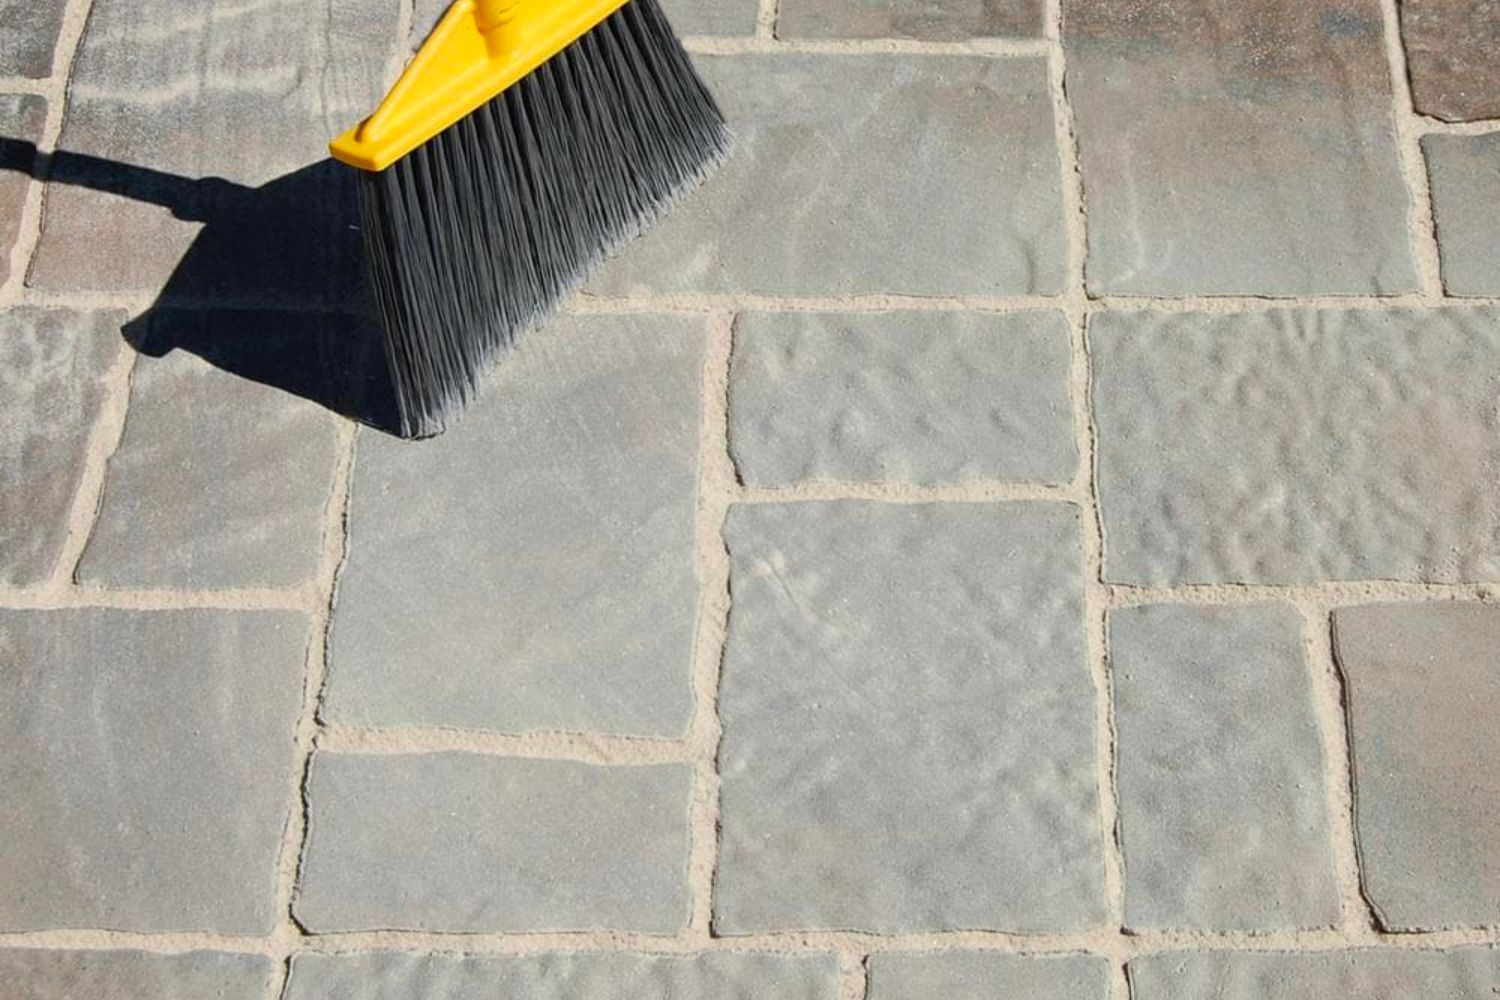 A broom to cleaning excess polymeric sand from between cement patio pavers.